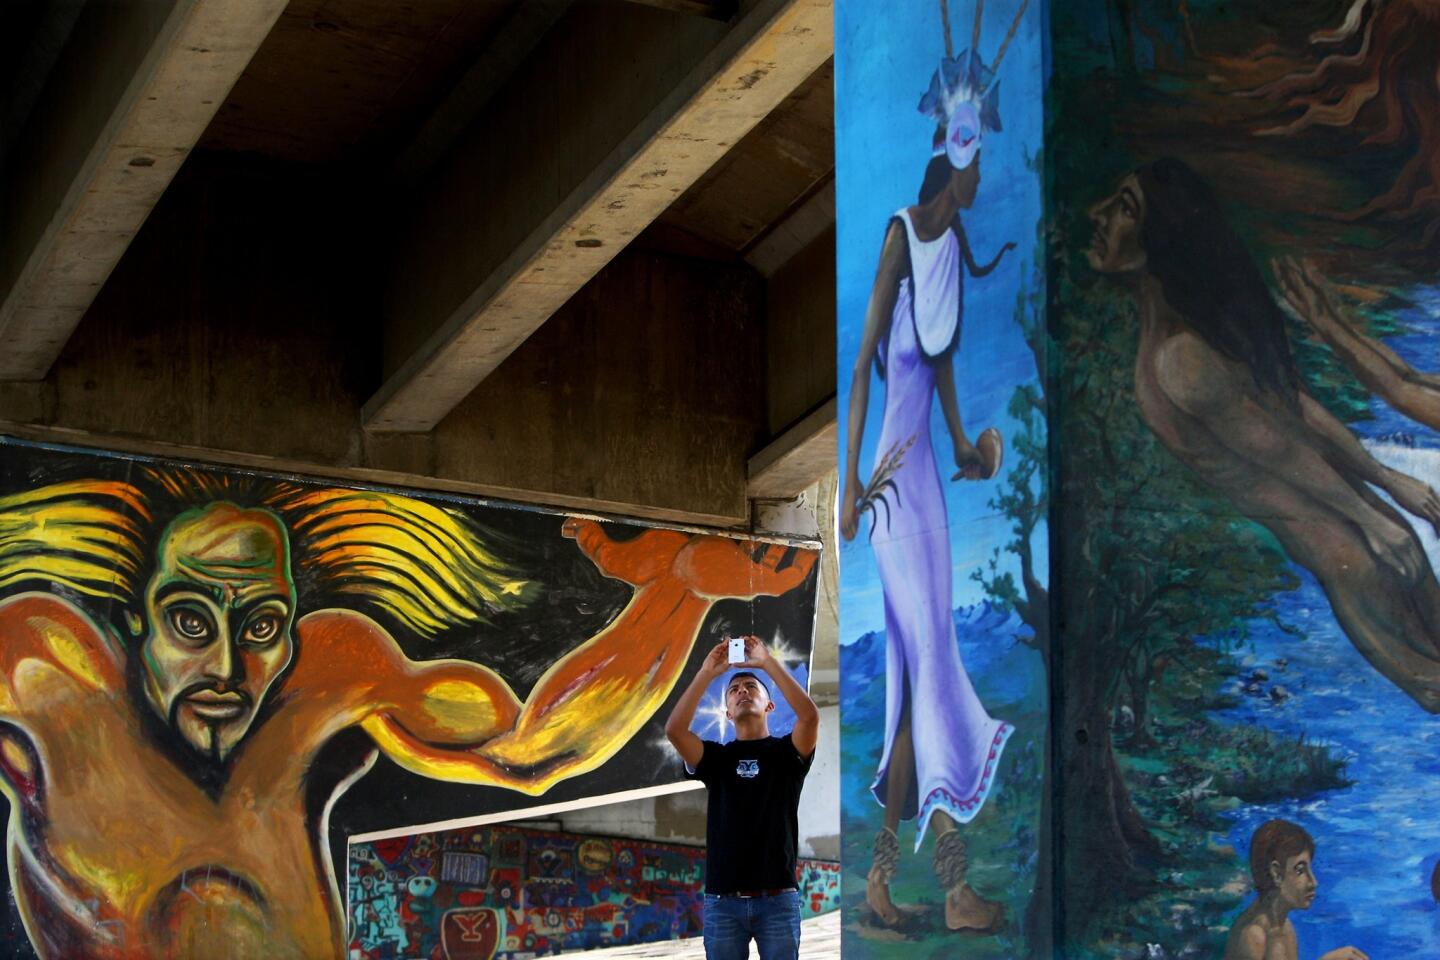 Joel Castillo of Ventura County pauses to shoot photos during a visit to Chicano Park. Behind him is a mural titled "Colossus," by Mario Torero, Mano Lima and Laurie Manzano. To the right is a mural titled "Indian Dancer," and a second named "Tree of Life."